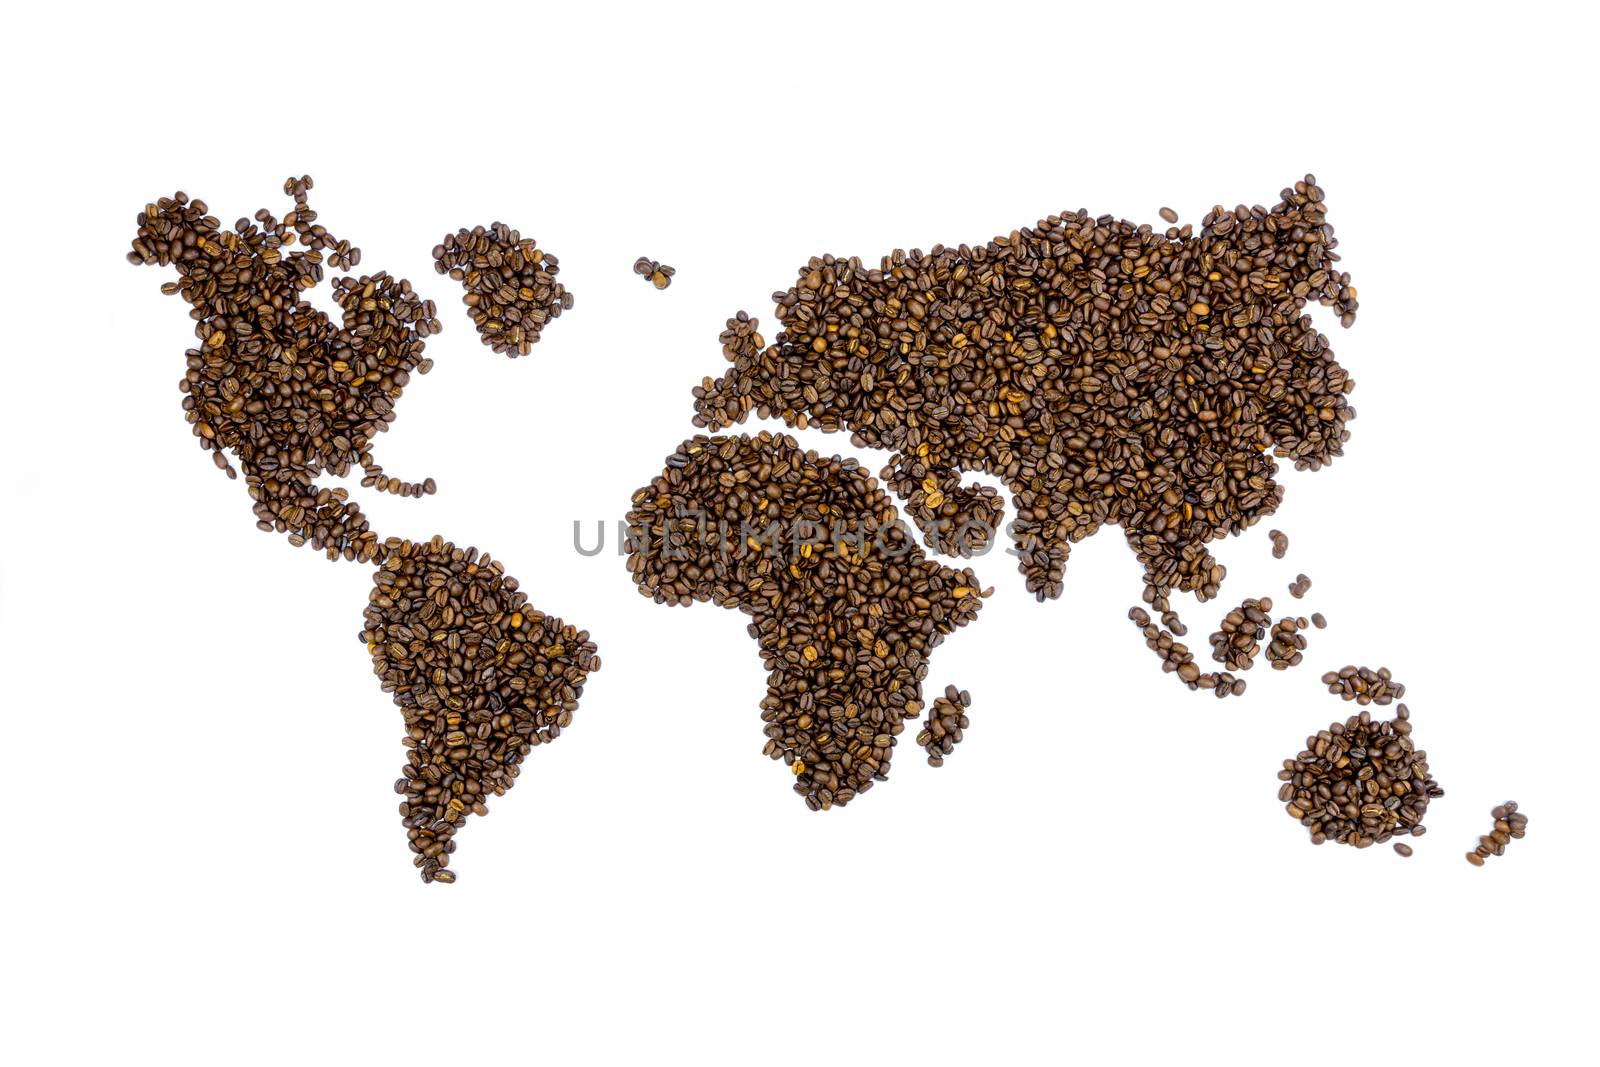 World map filled with coffee beans isolated on white background